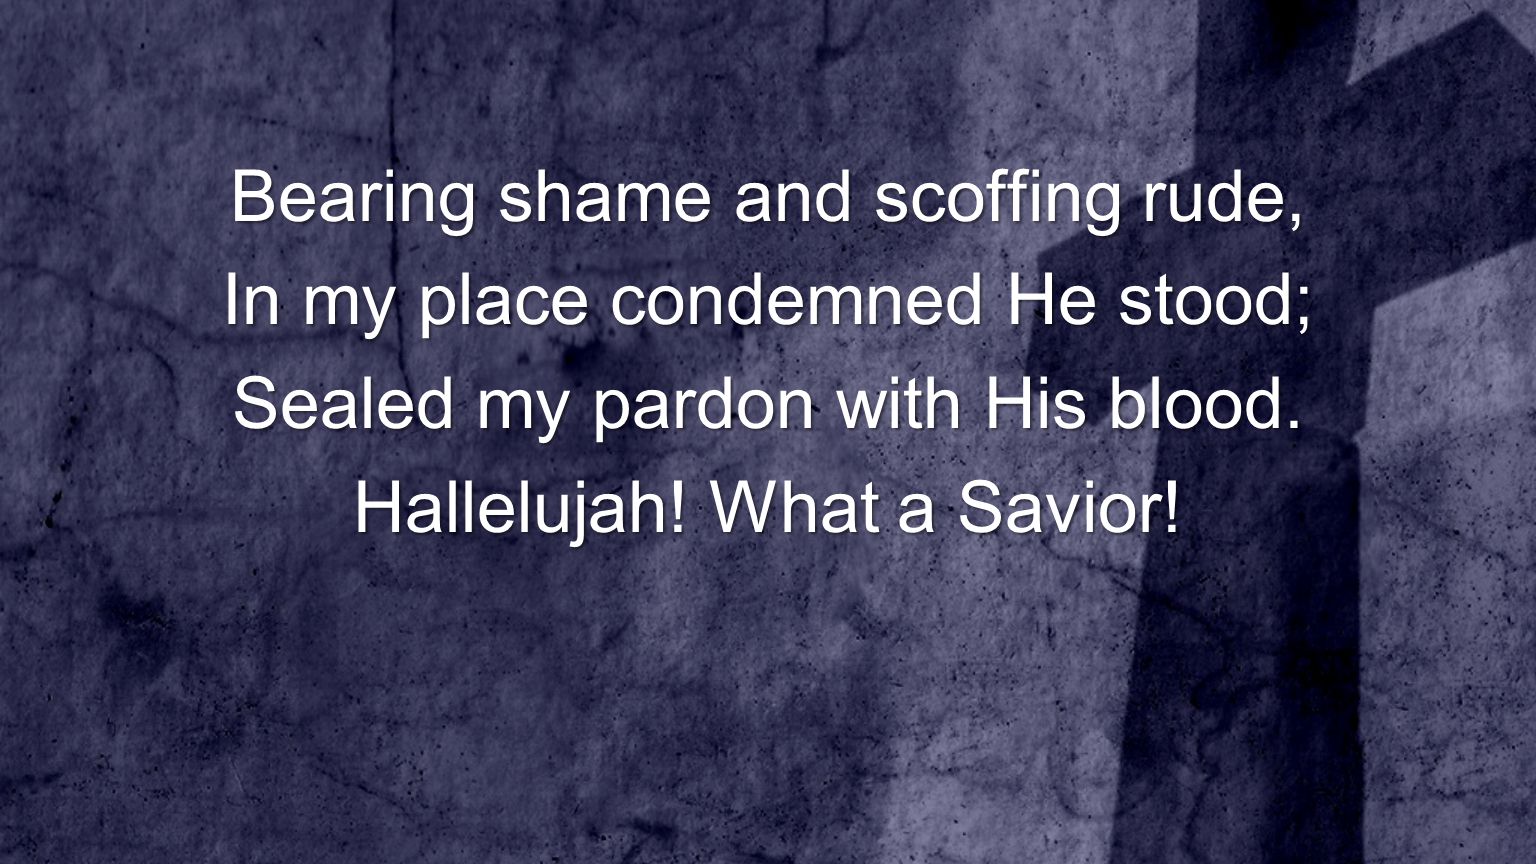 Bearing shame and scoffing rude, In my place condemned He stood; Sealed my pardon with His blood.